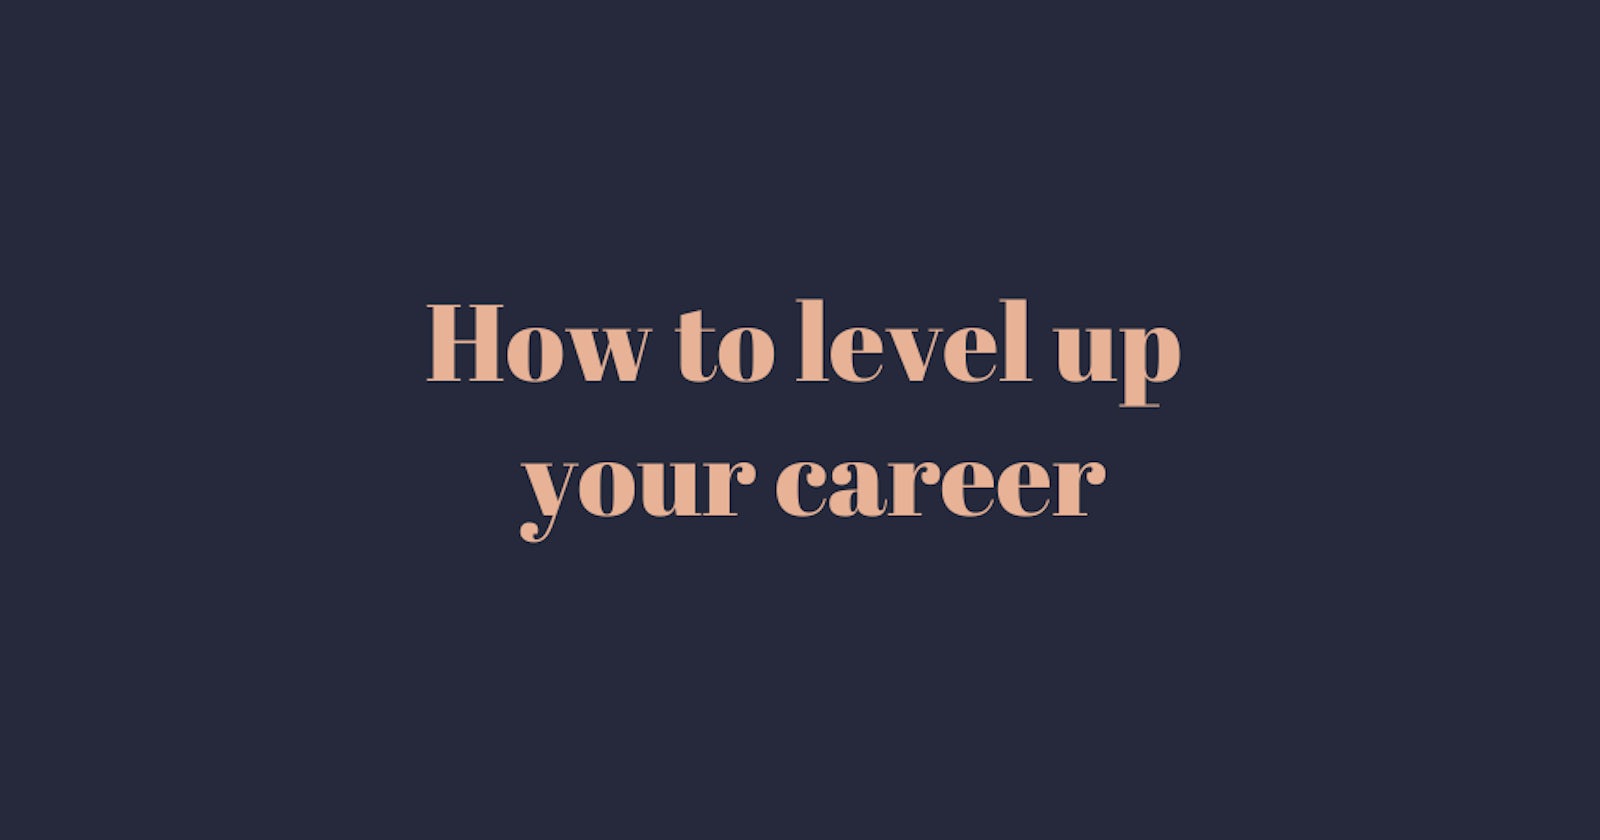 How to level up your career